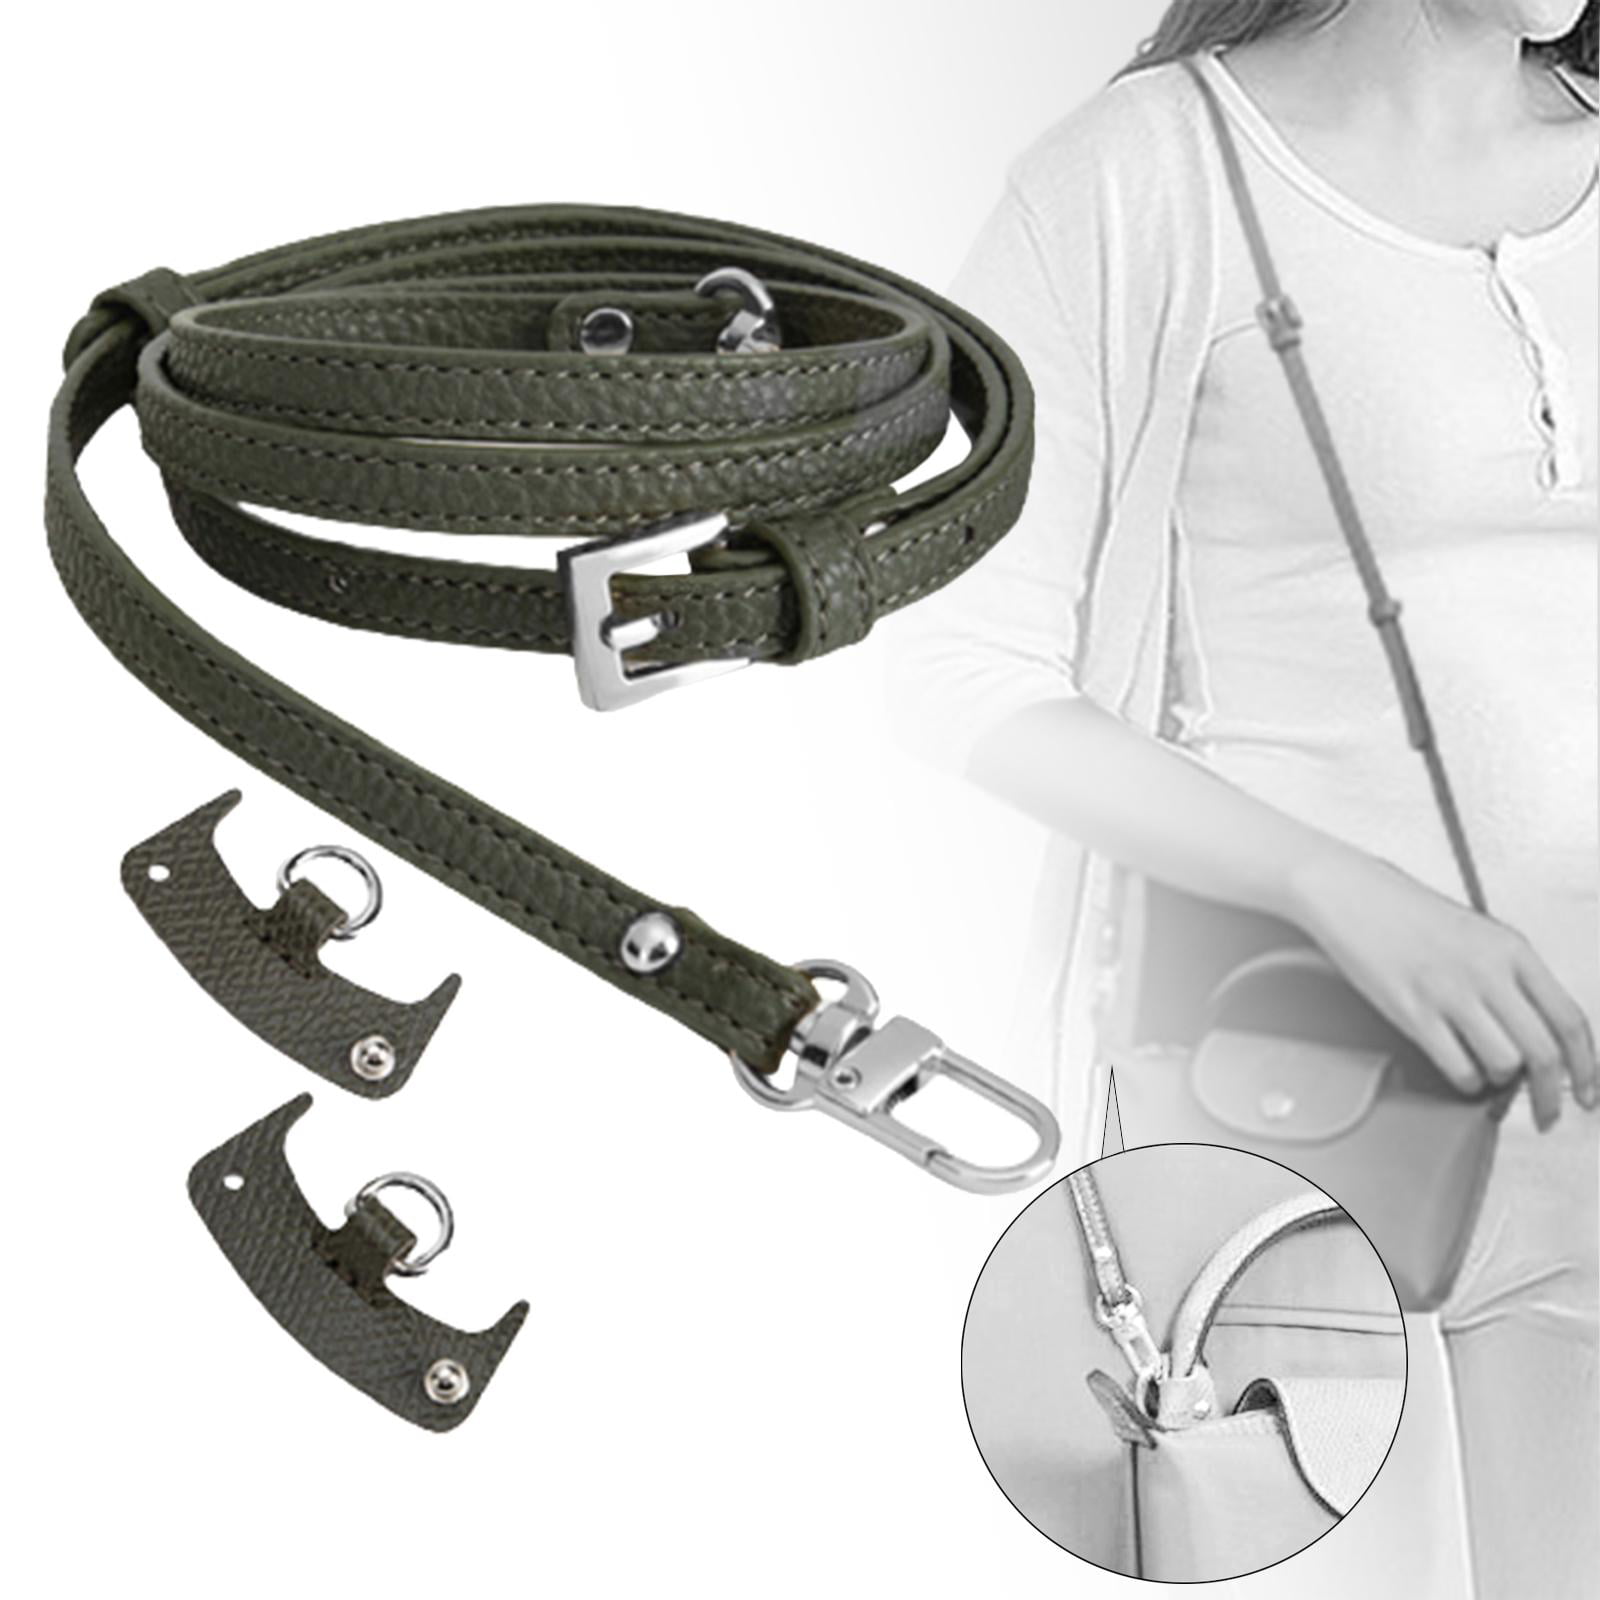 Purse Strap Universal Adjustable with No Punching Buckle Bag Shoulder Strap  Cross Body Strap for Small Bag Briefcase Purse DIY Modification Black